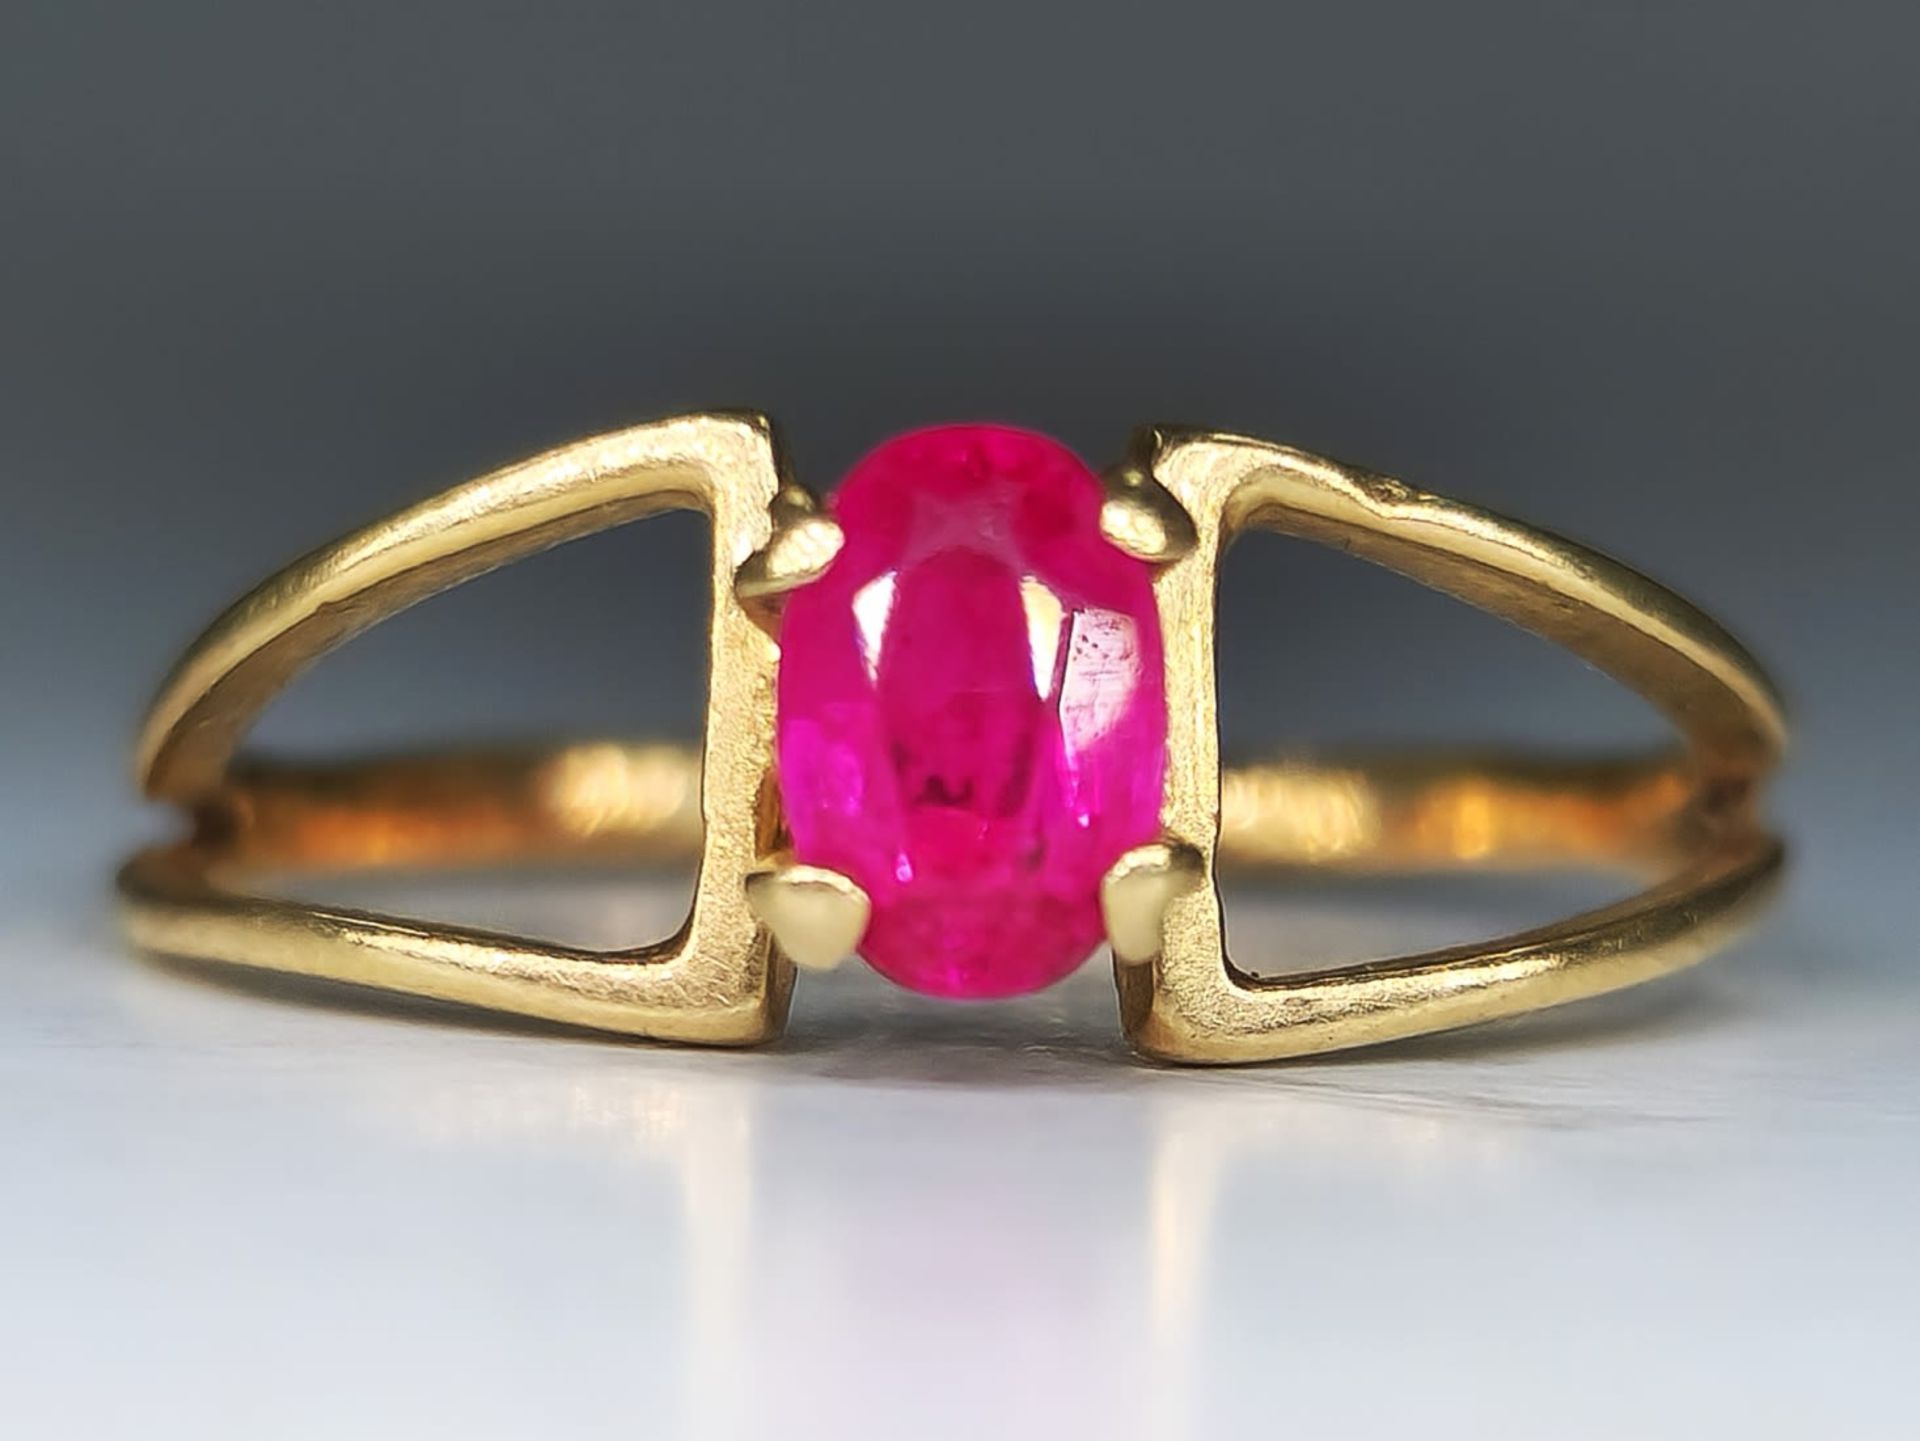 A 14K gold ring with a red 'Rubellite' stone, not signed but the purity of the gold has been tested,